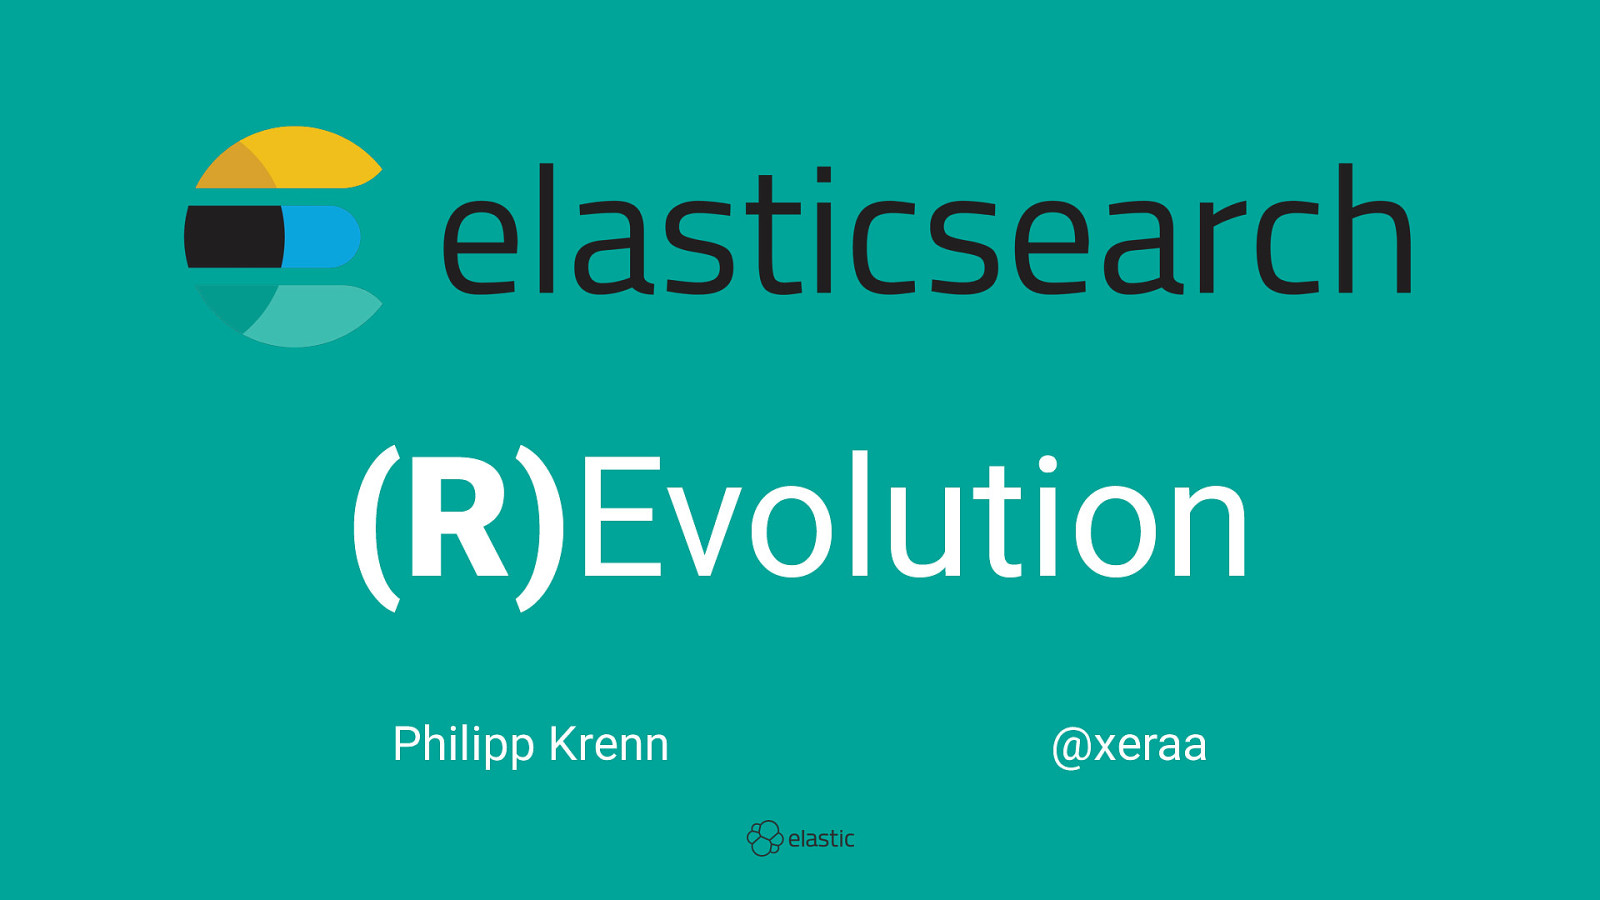 Elasticsearch (R)Evolution — You Know, for Search...